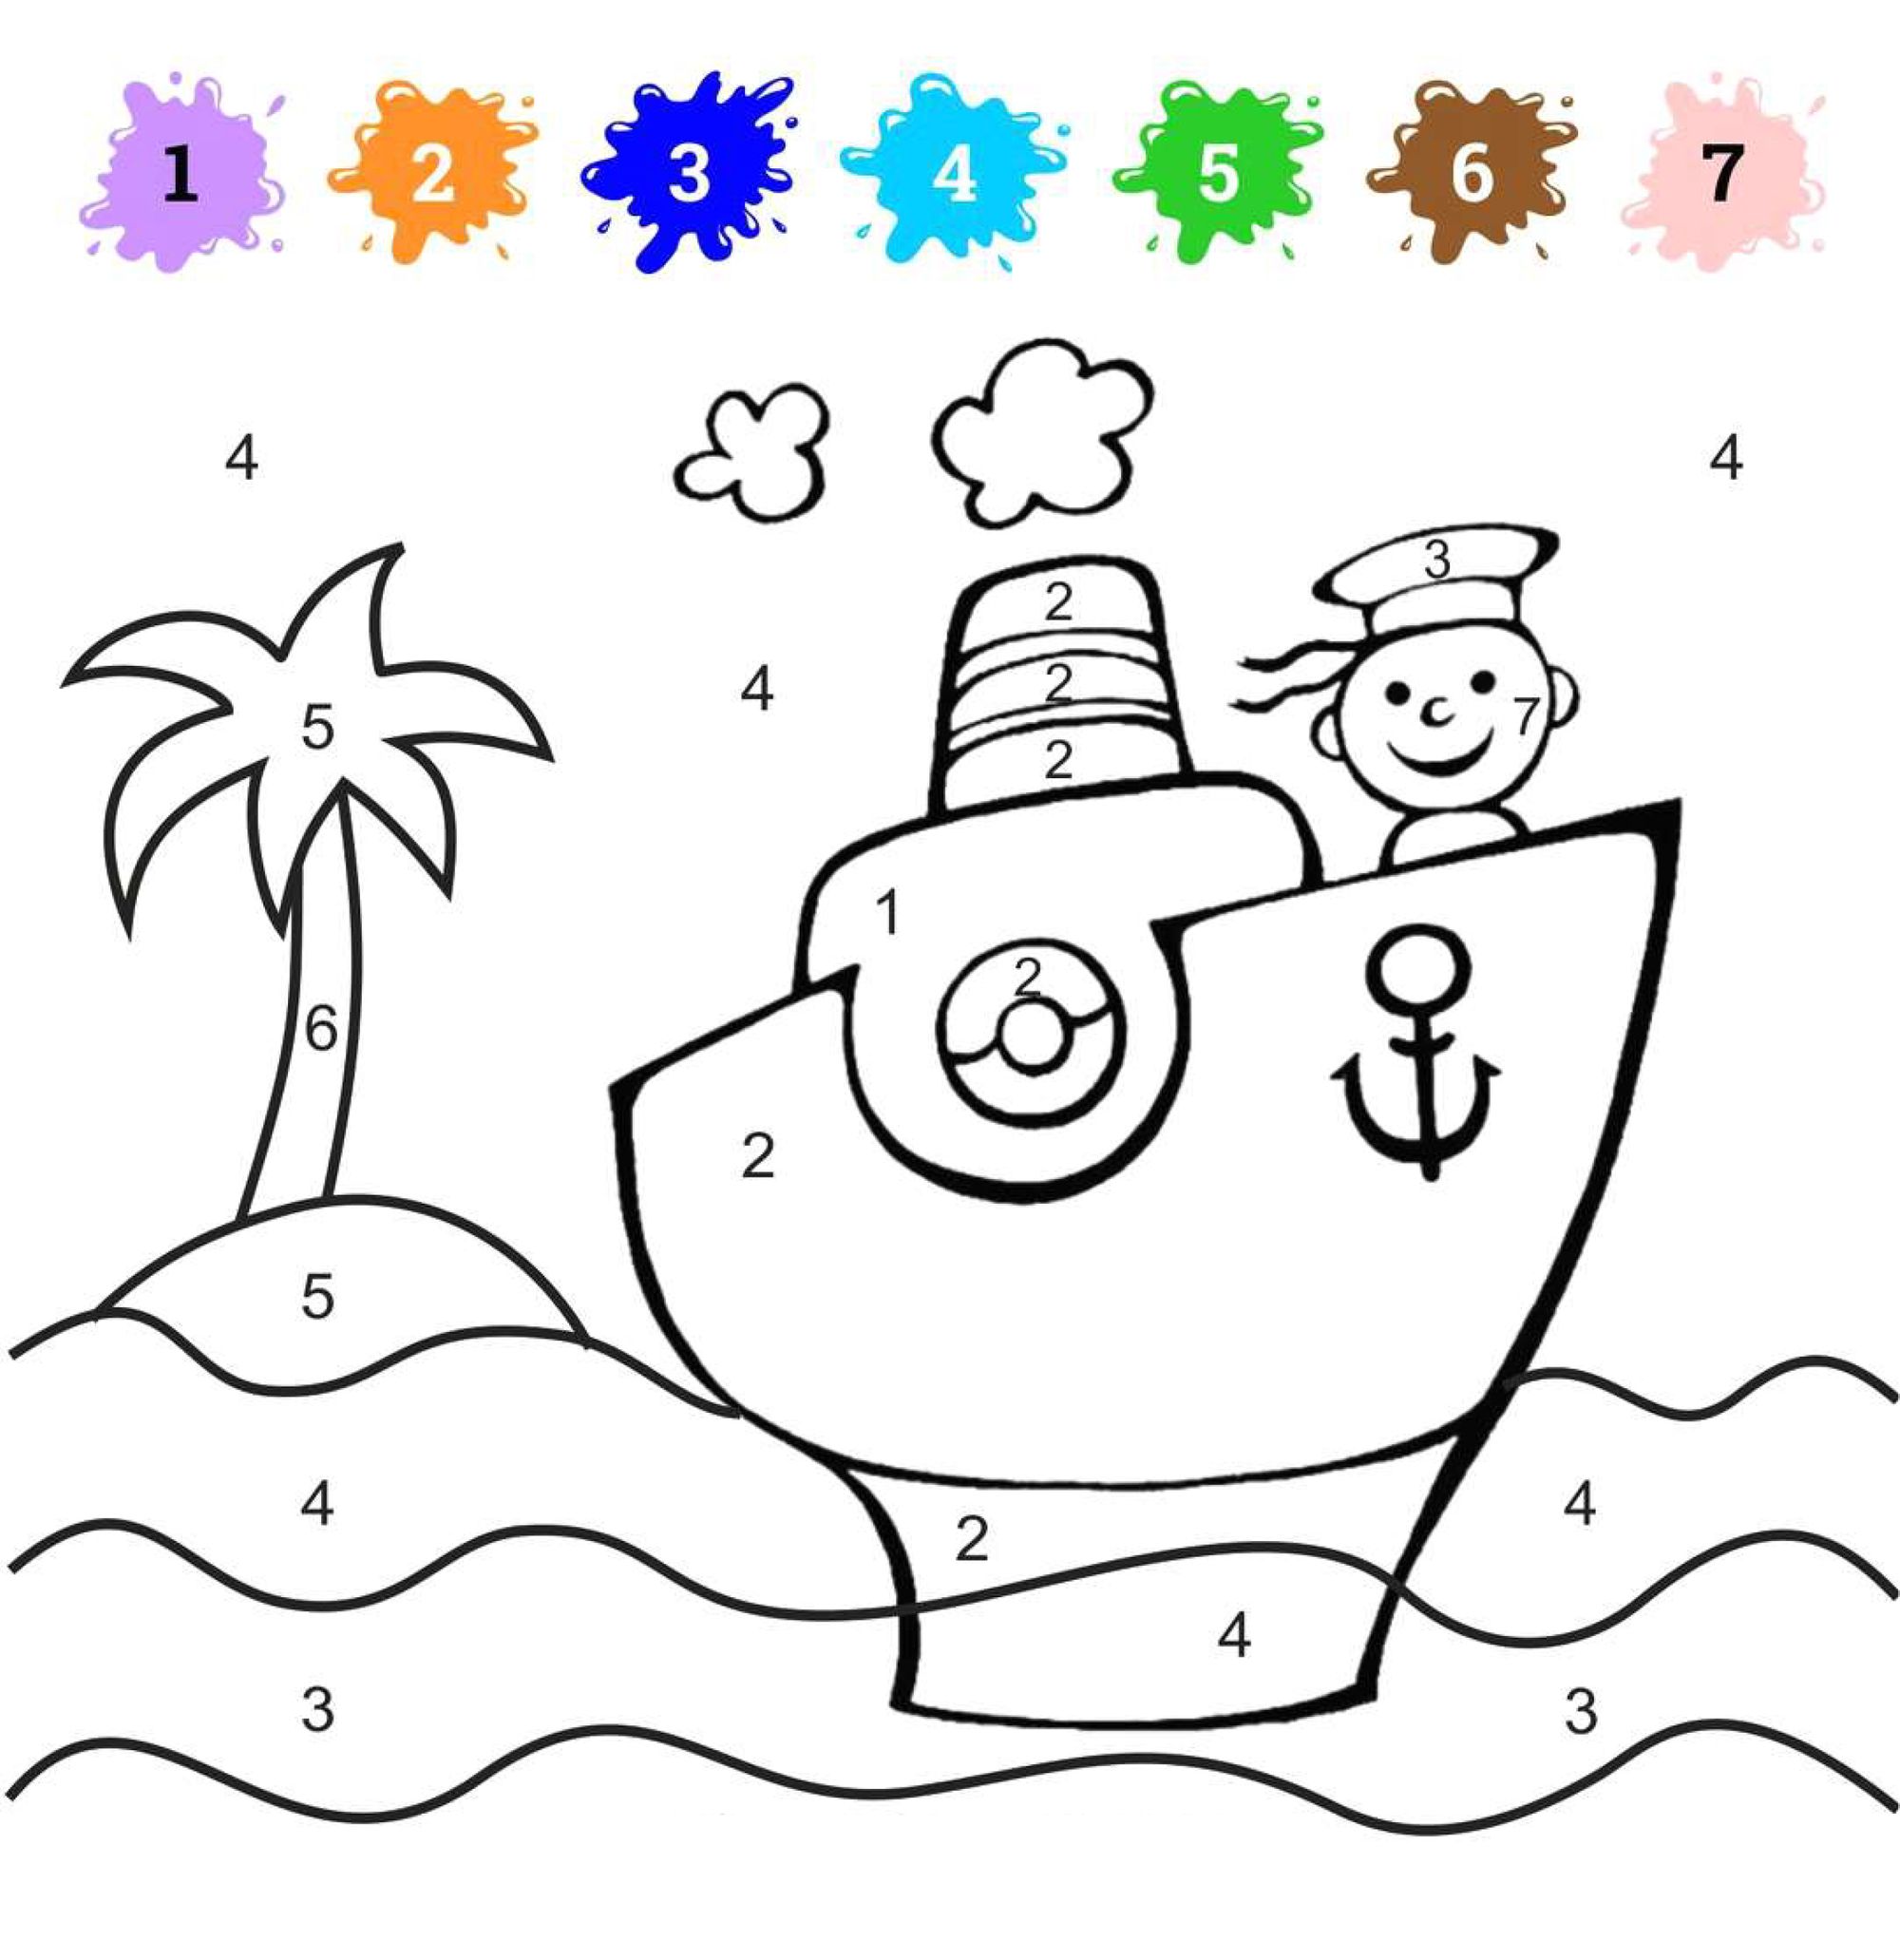 Coloring By Numbers For Children BF7